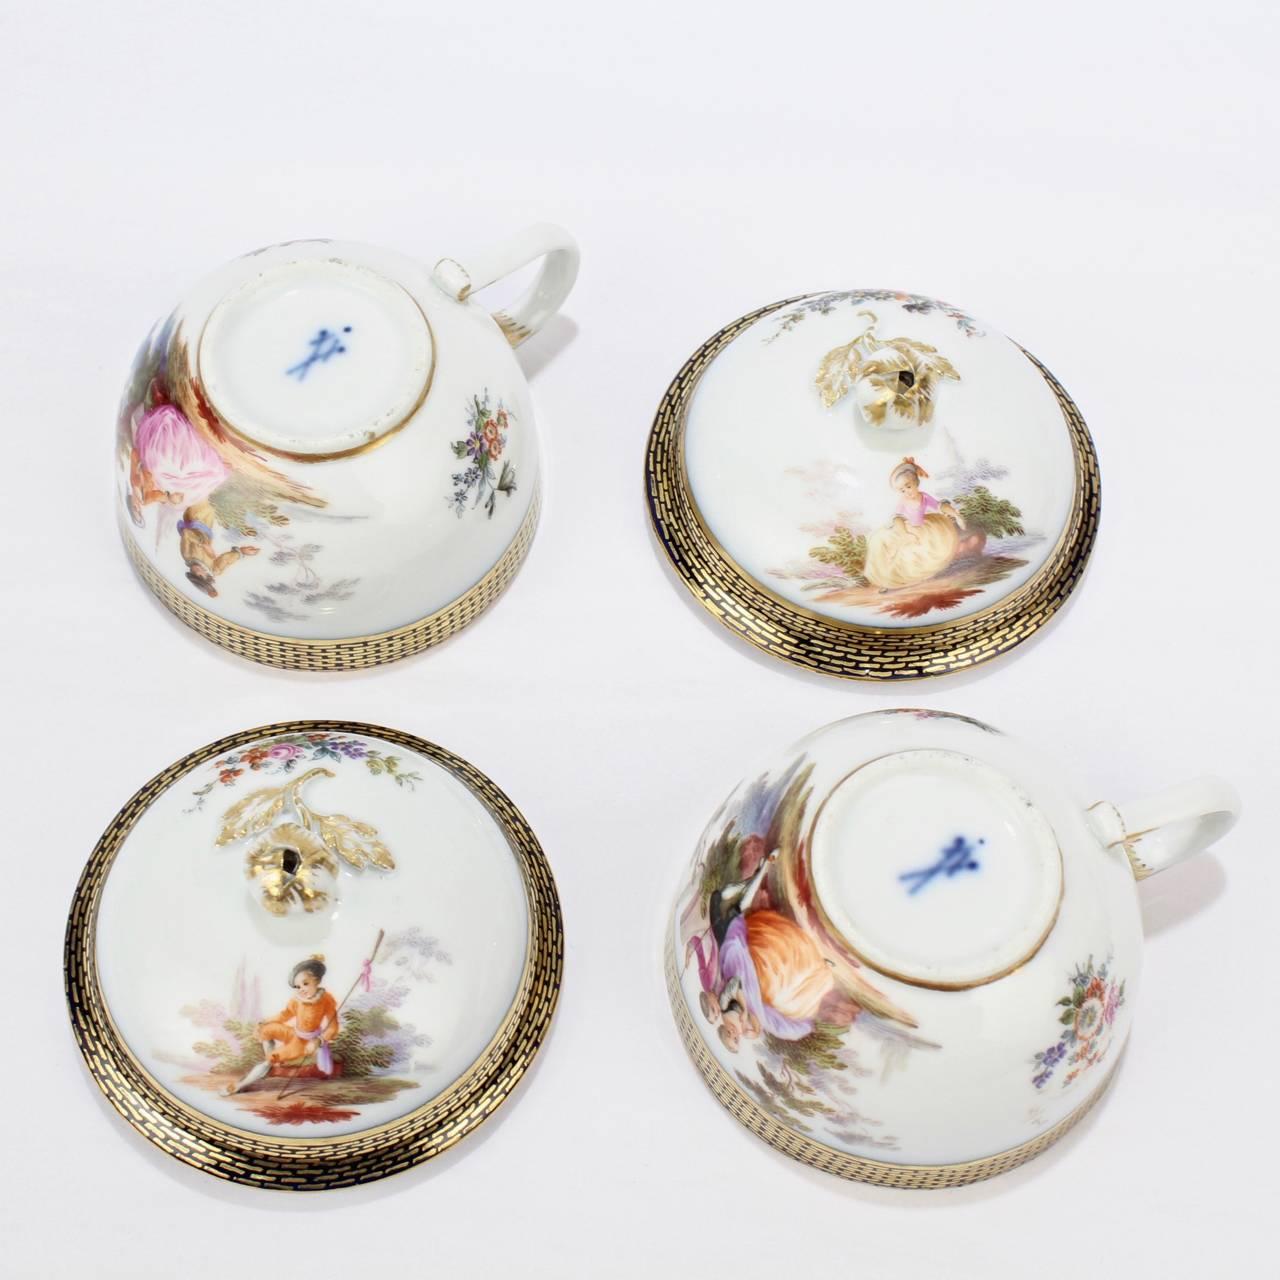 Pair of Antique Meissen Porcelain Covered Tea Cups and Saucers, 19th Century 2